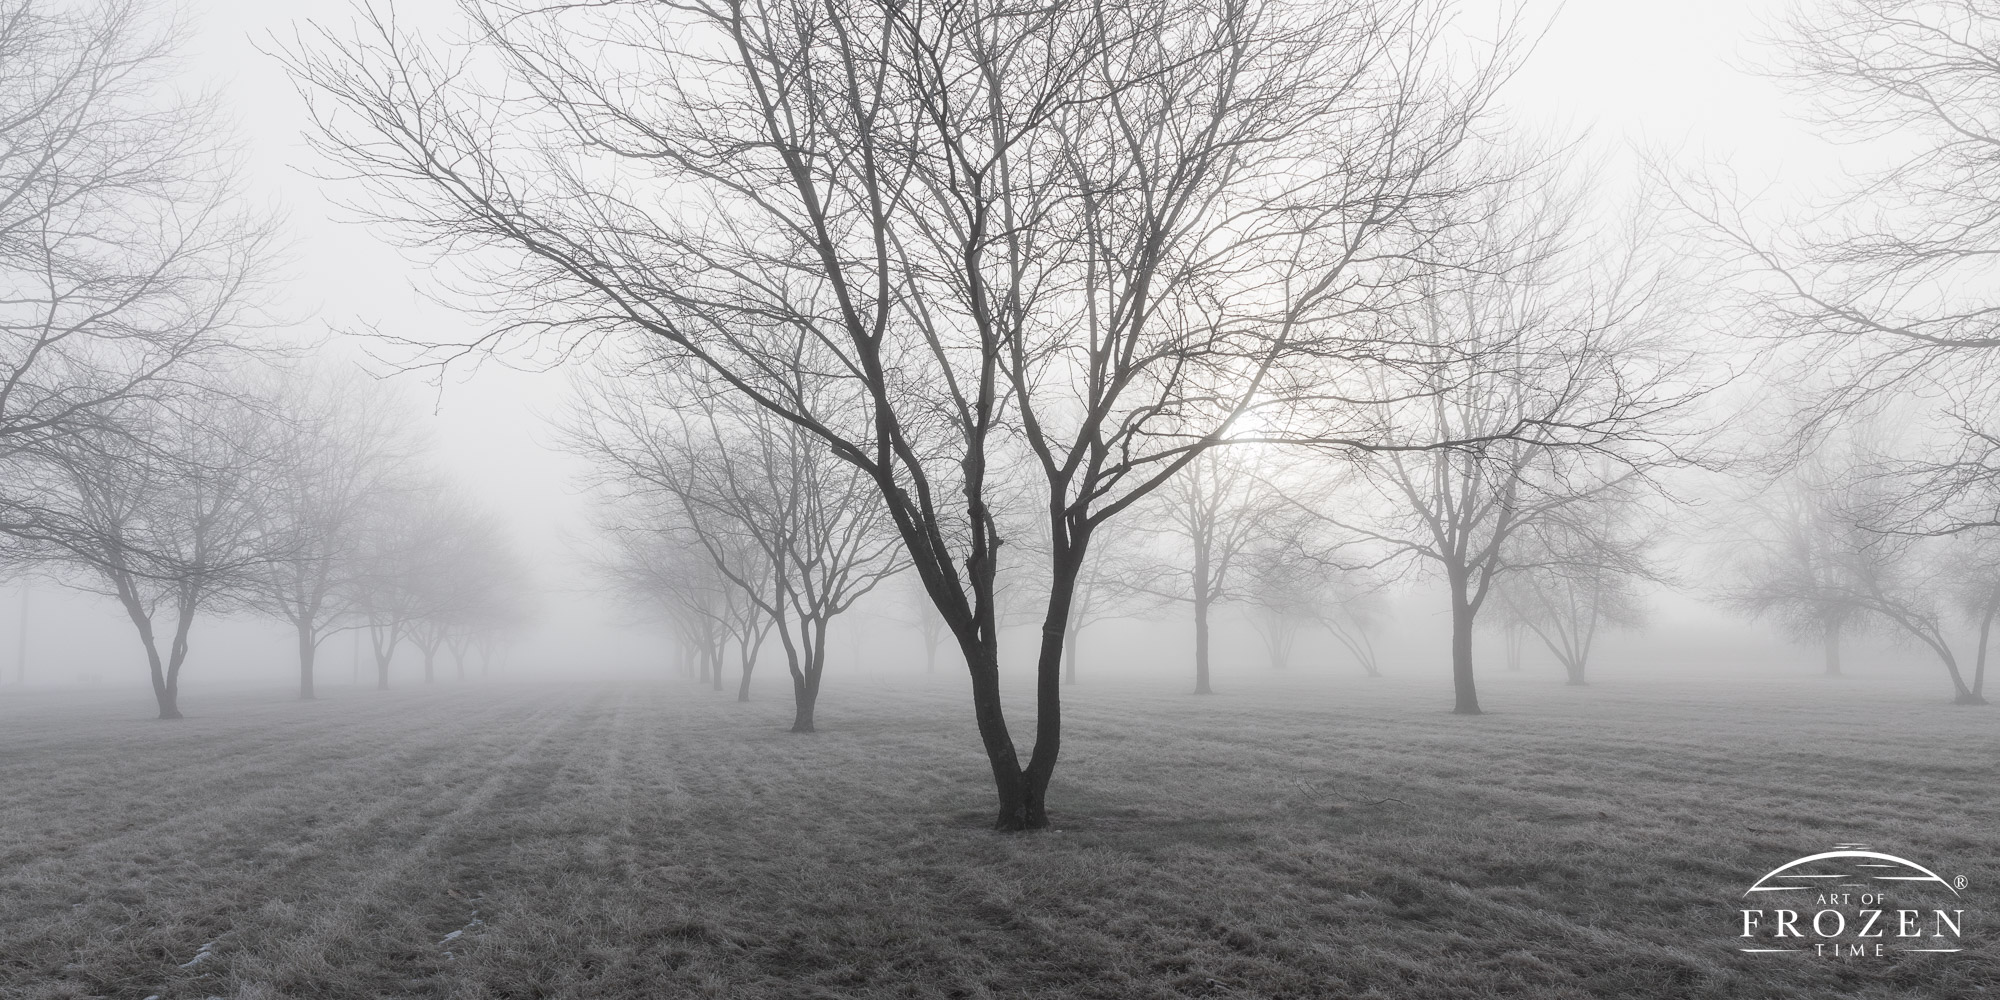 This linear grove of trees mysteriously ends as the successive silhouettes ambiguously fade into the fog.